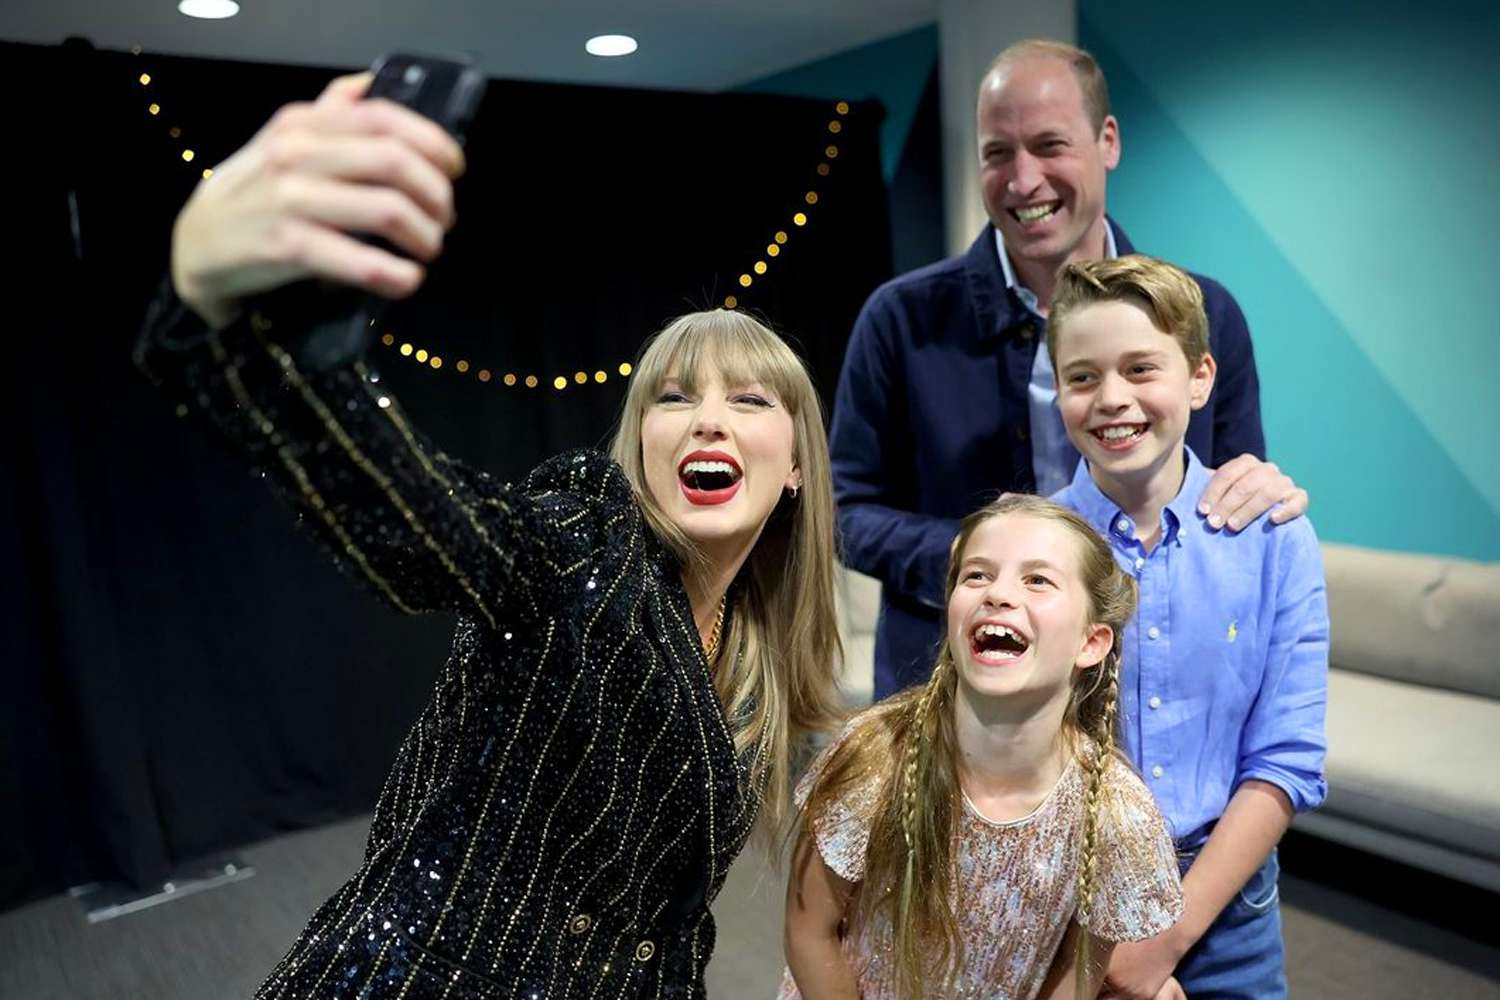 Royal Swifties! Prince William, George and Charlotte Snap Backstage Selfie with Taylor Swift: 'A Great Evening'